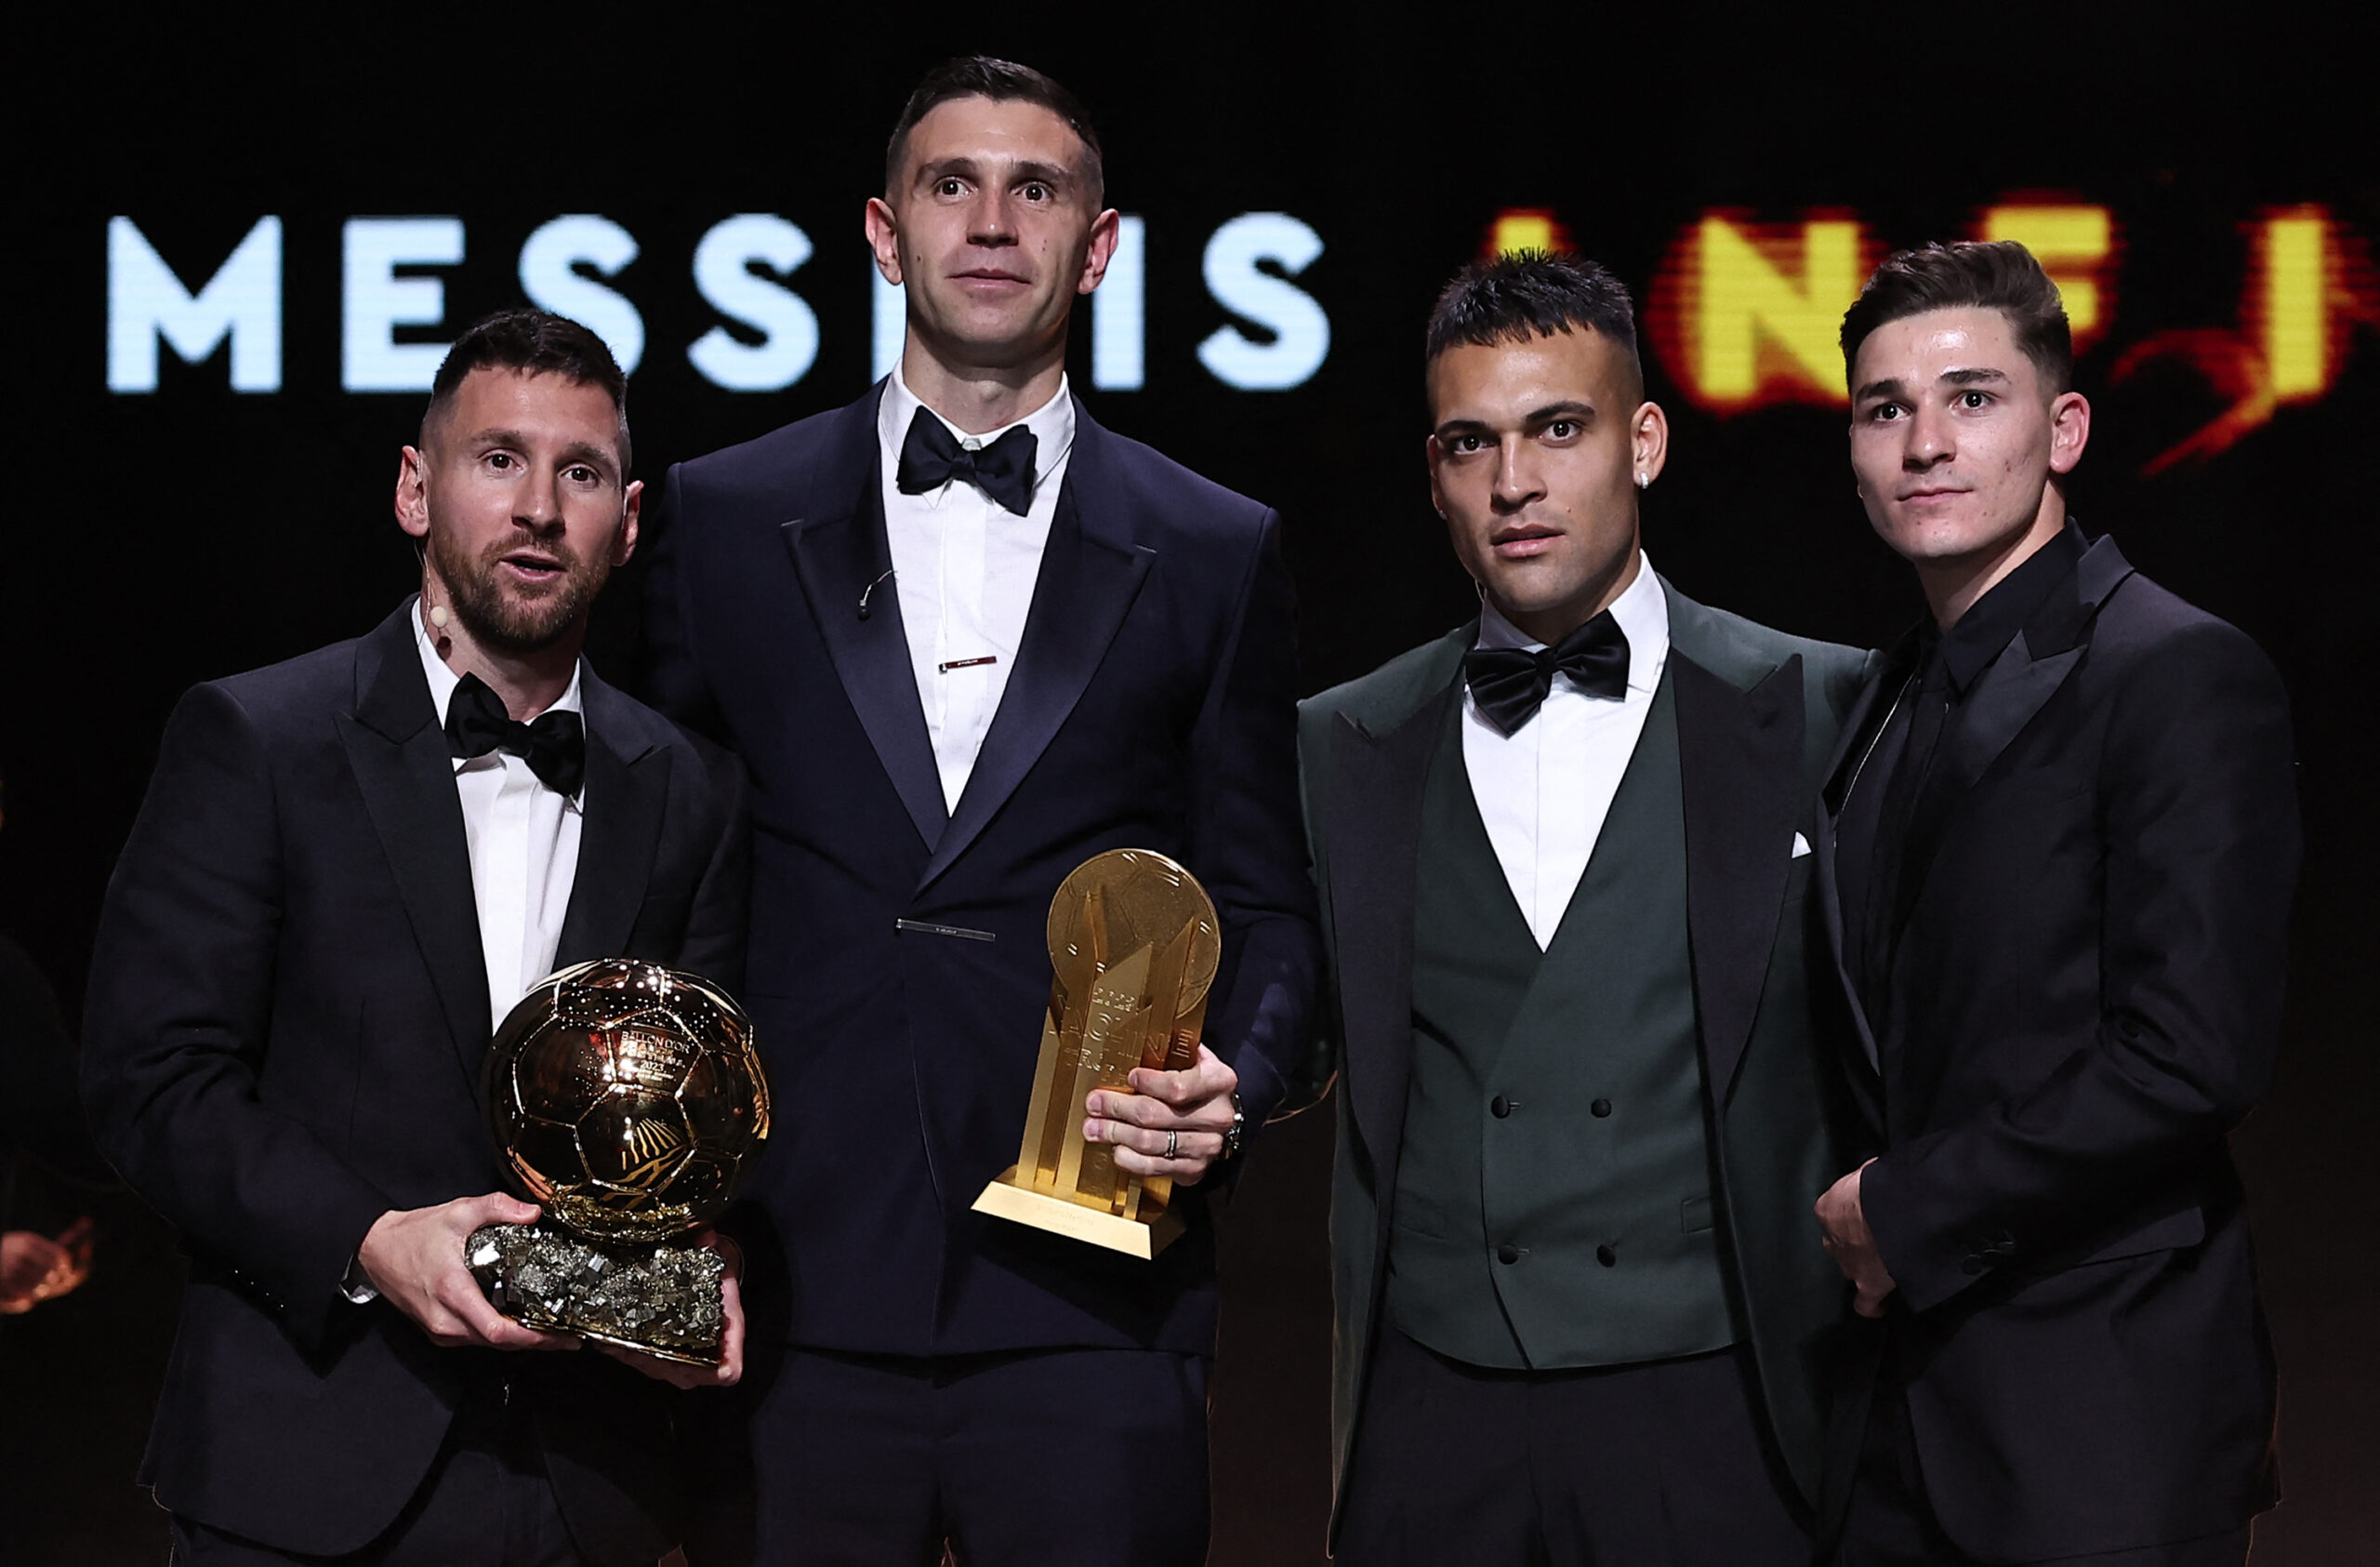 chilean-mauricio-pinilla-questions-that-messi-and-dibu-martinez-won-the-ballon-d'or-and-best-goalkeeper